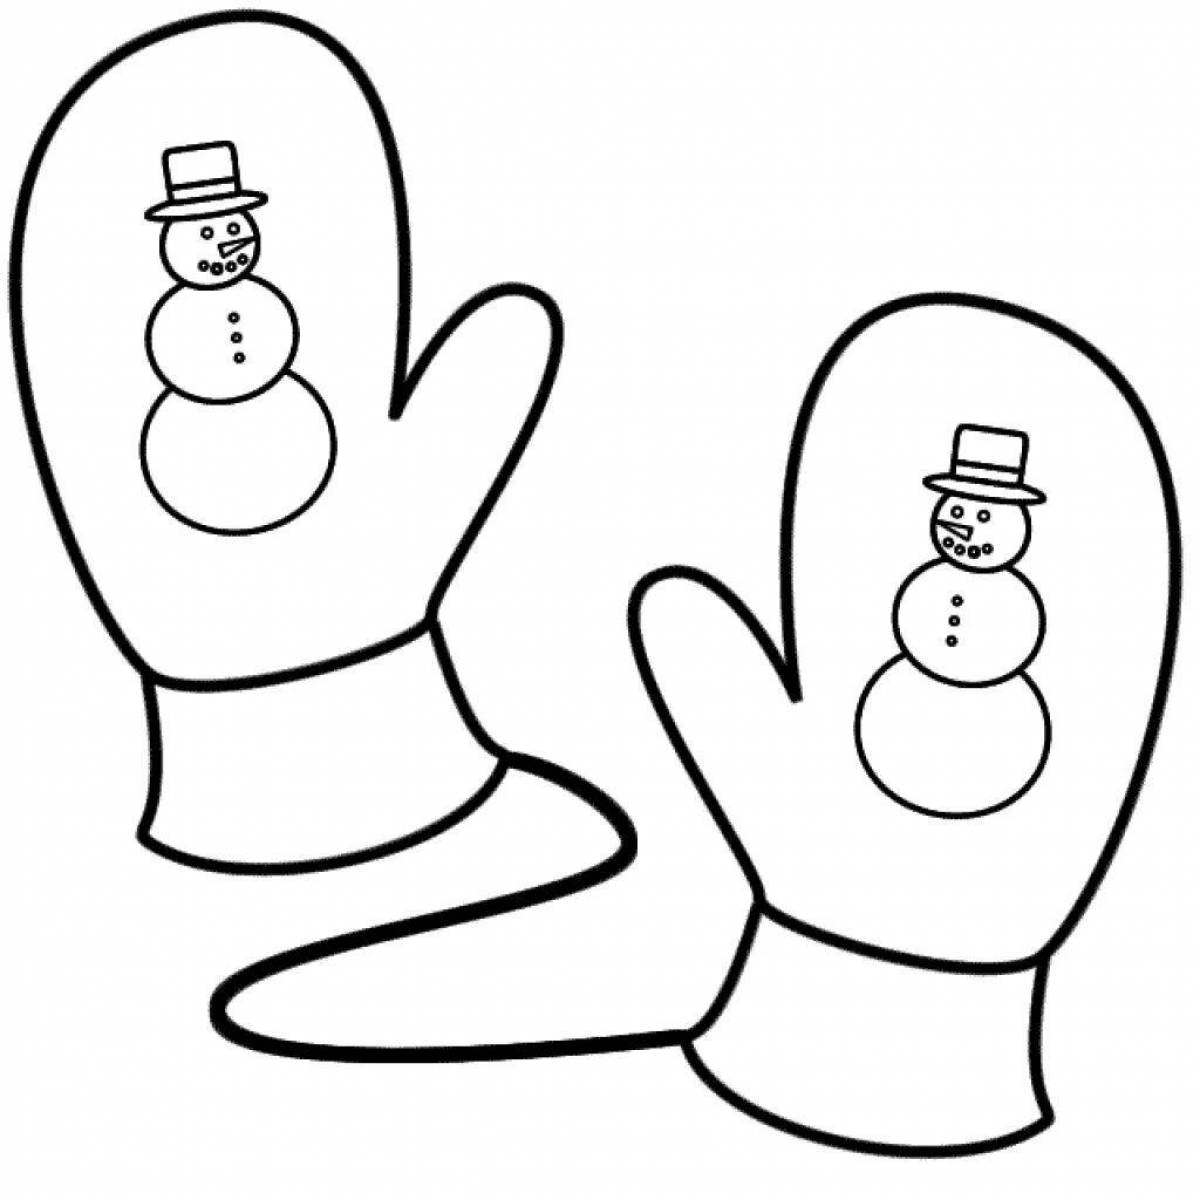 Colorful mittens coloring book for kids